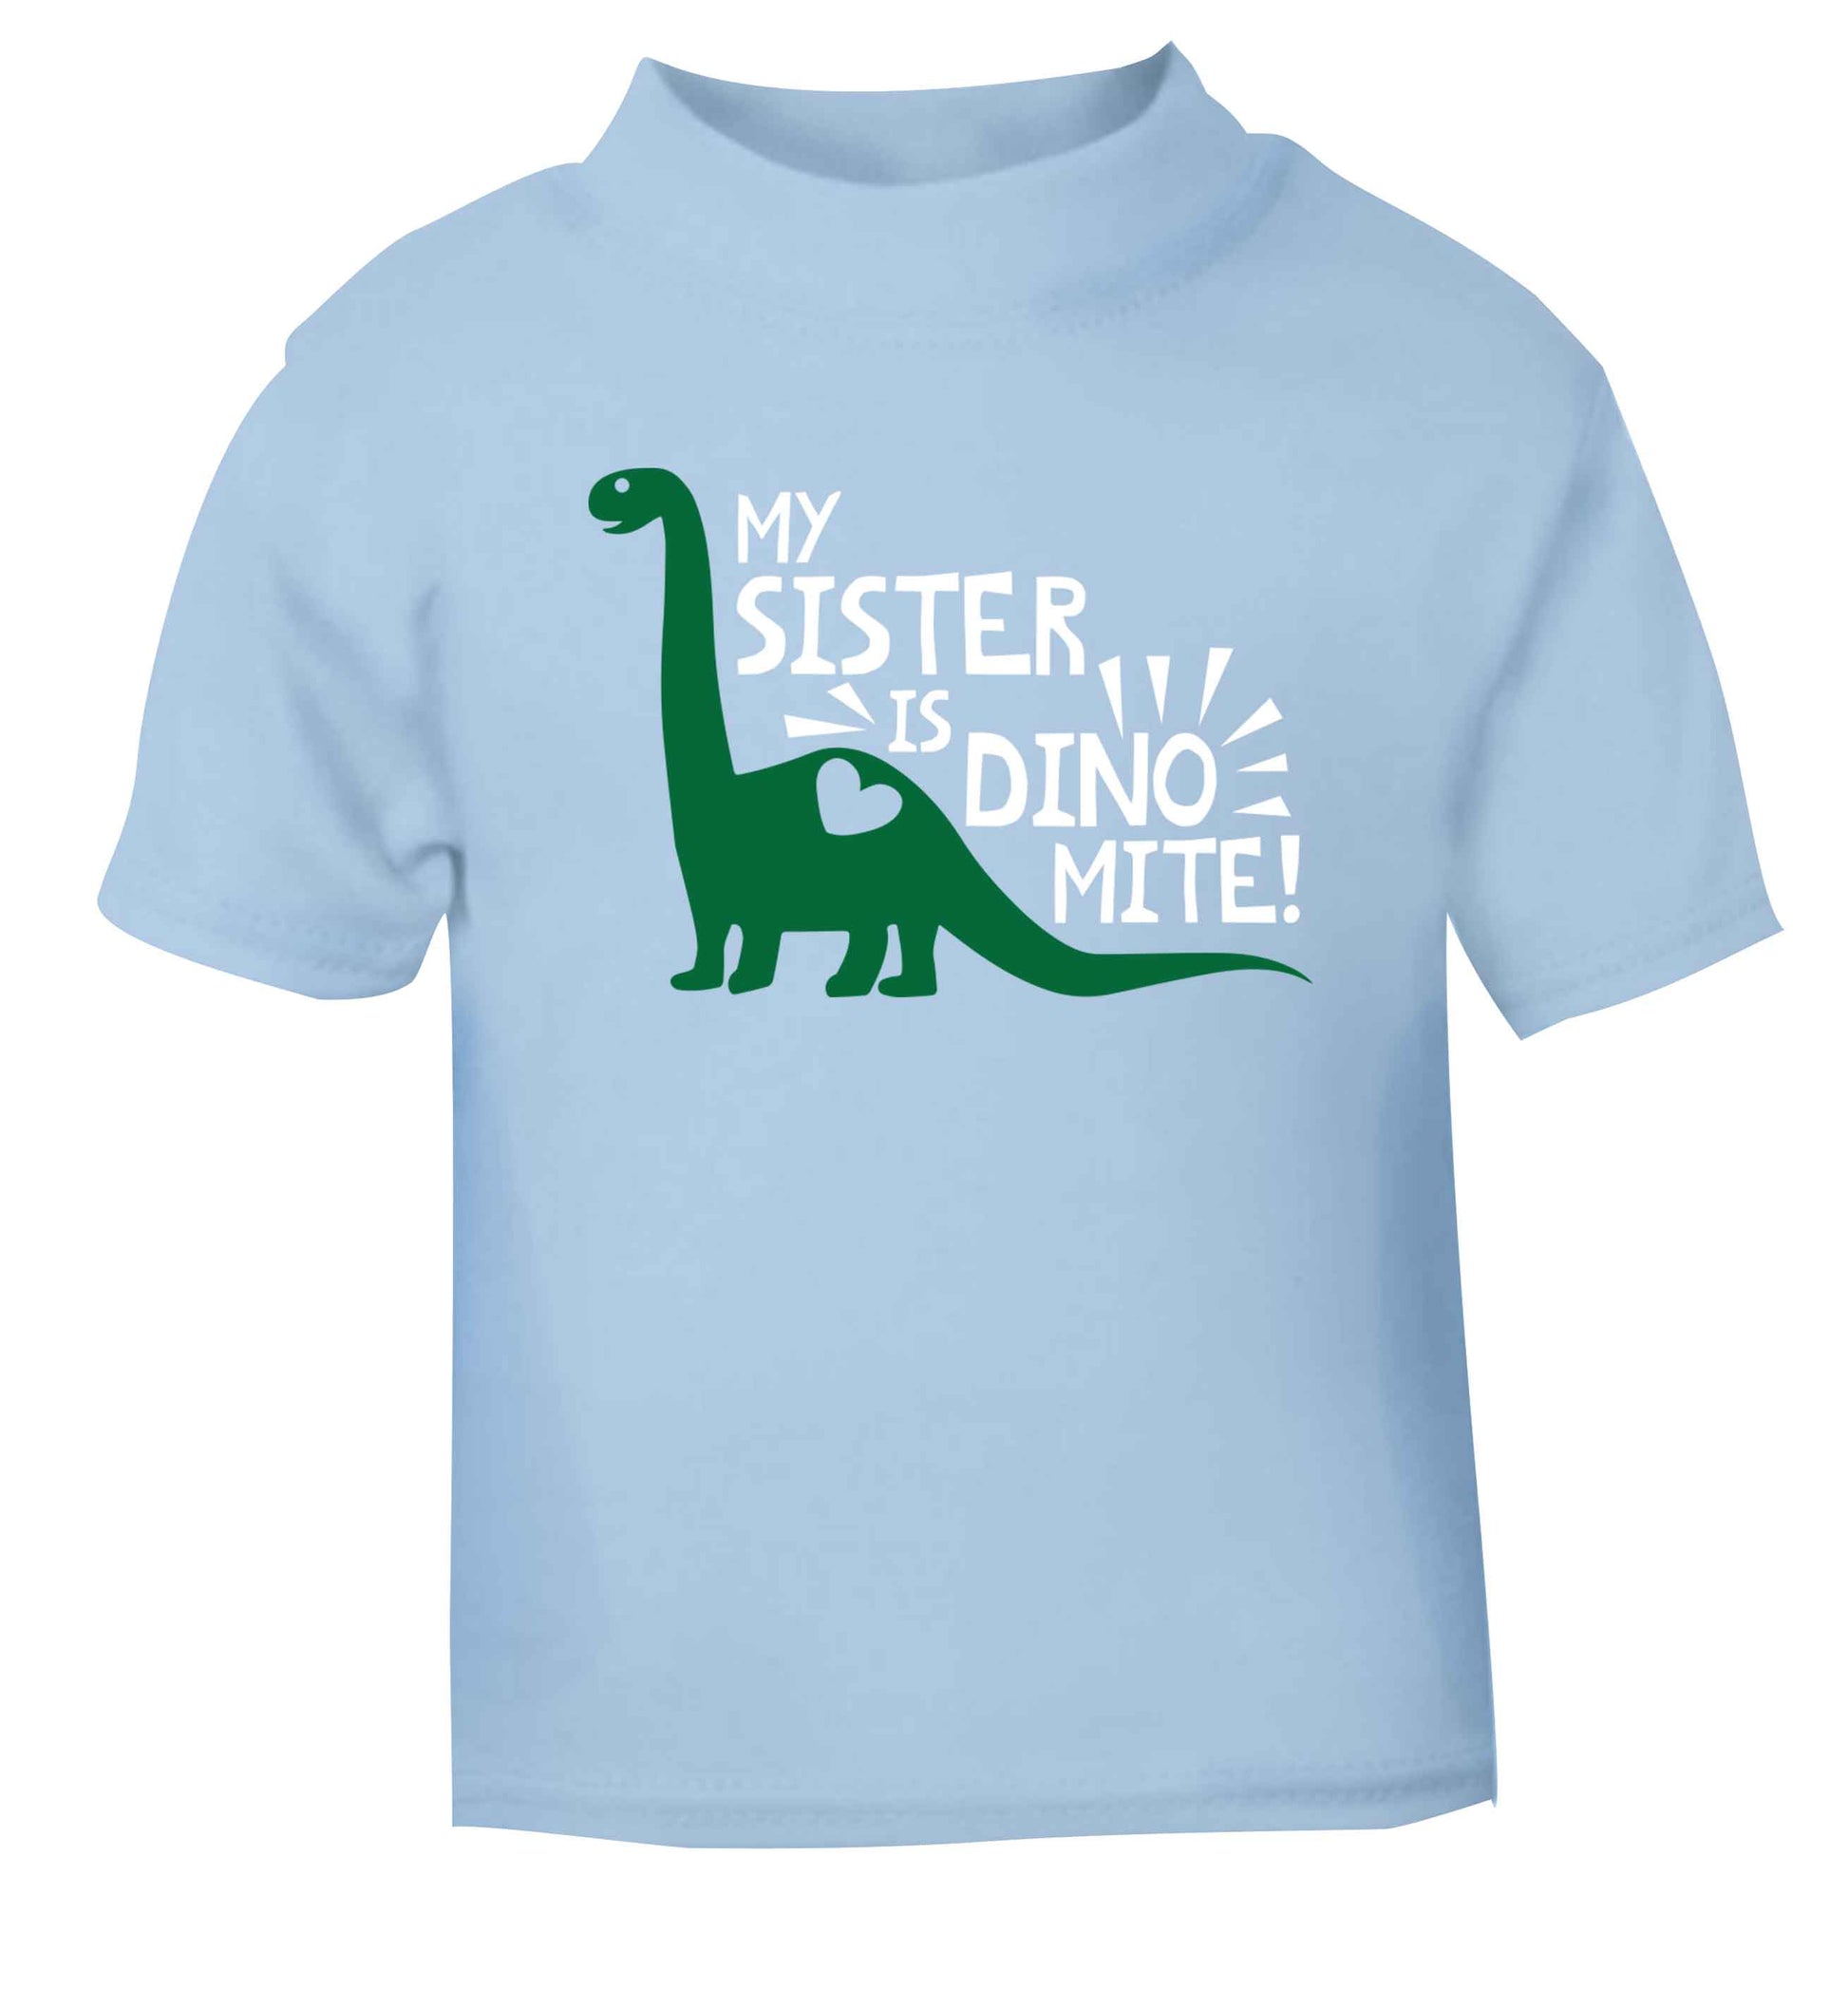 My sister is dinomite! light blue Baby Toddler Tshirt 2 Years